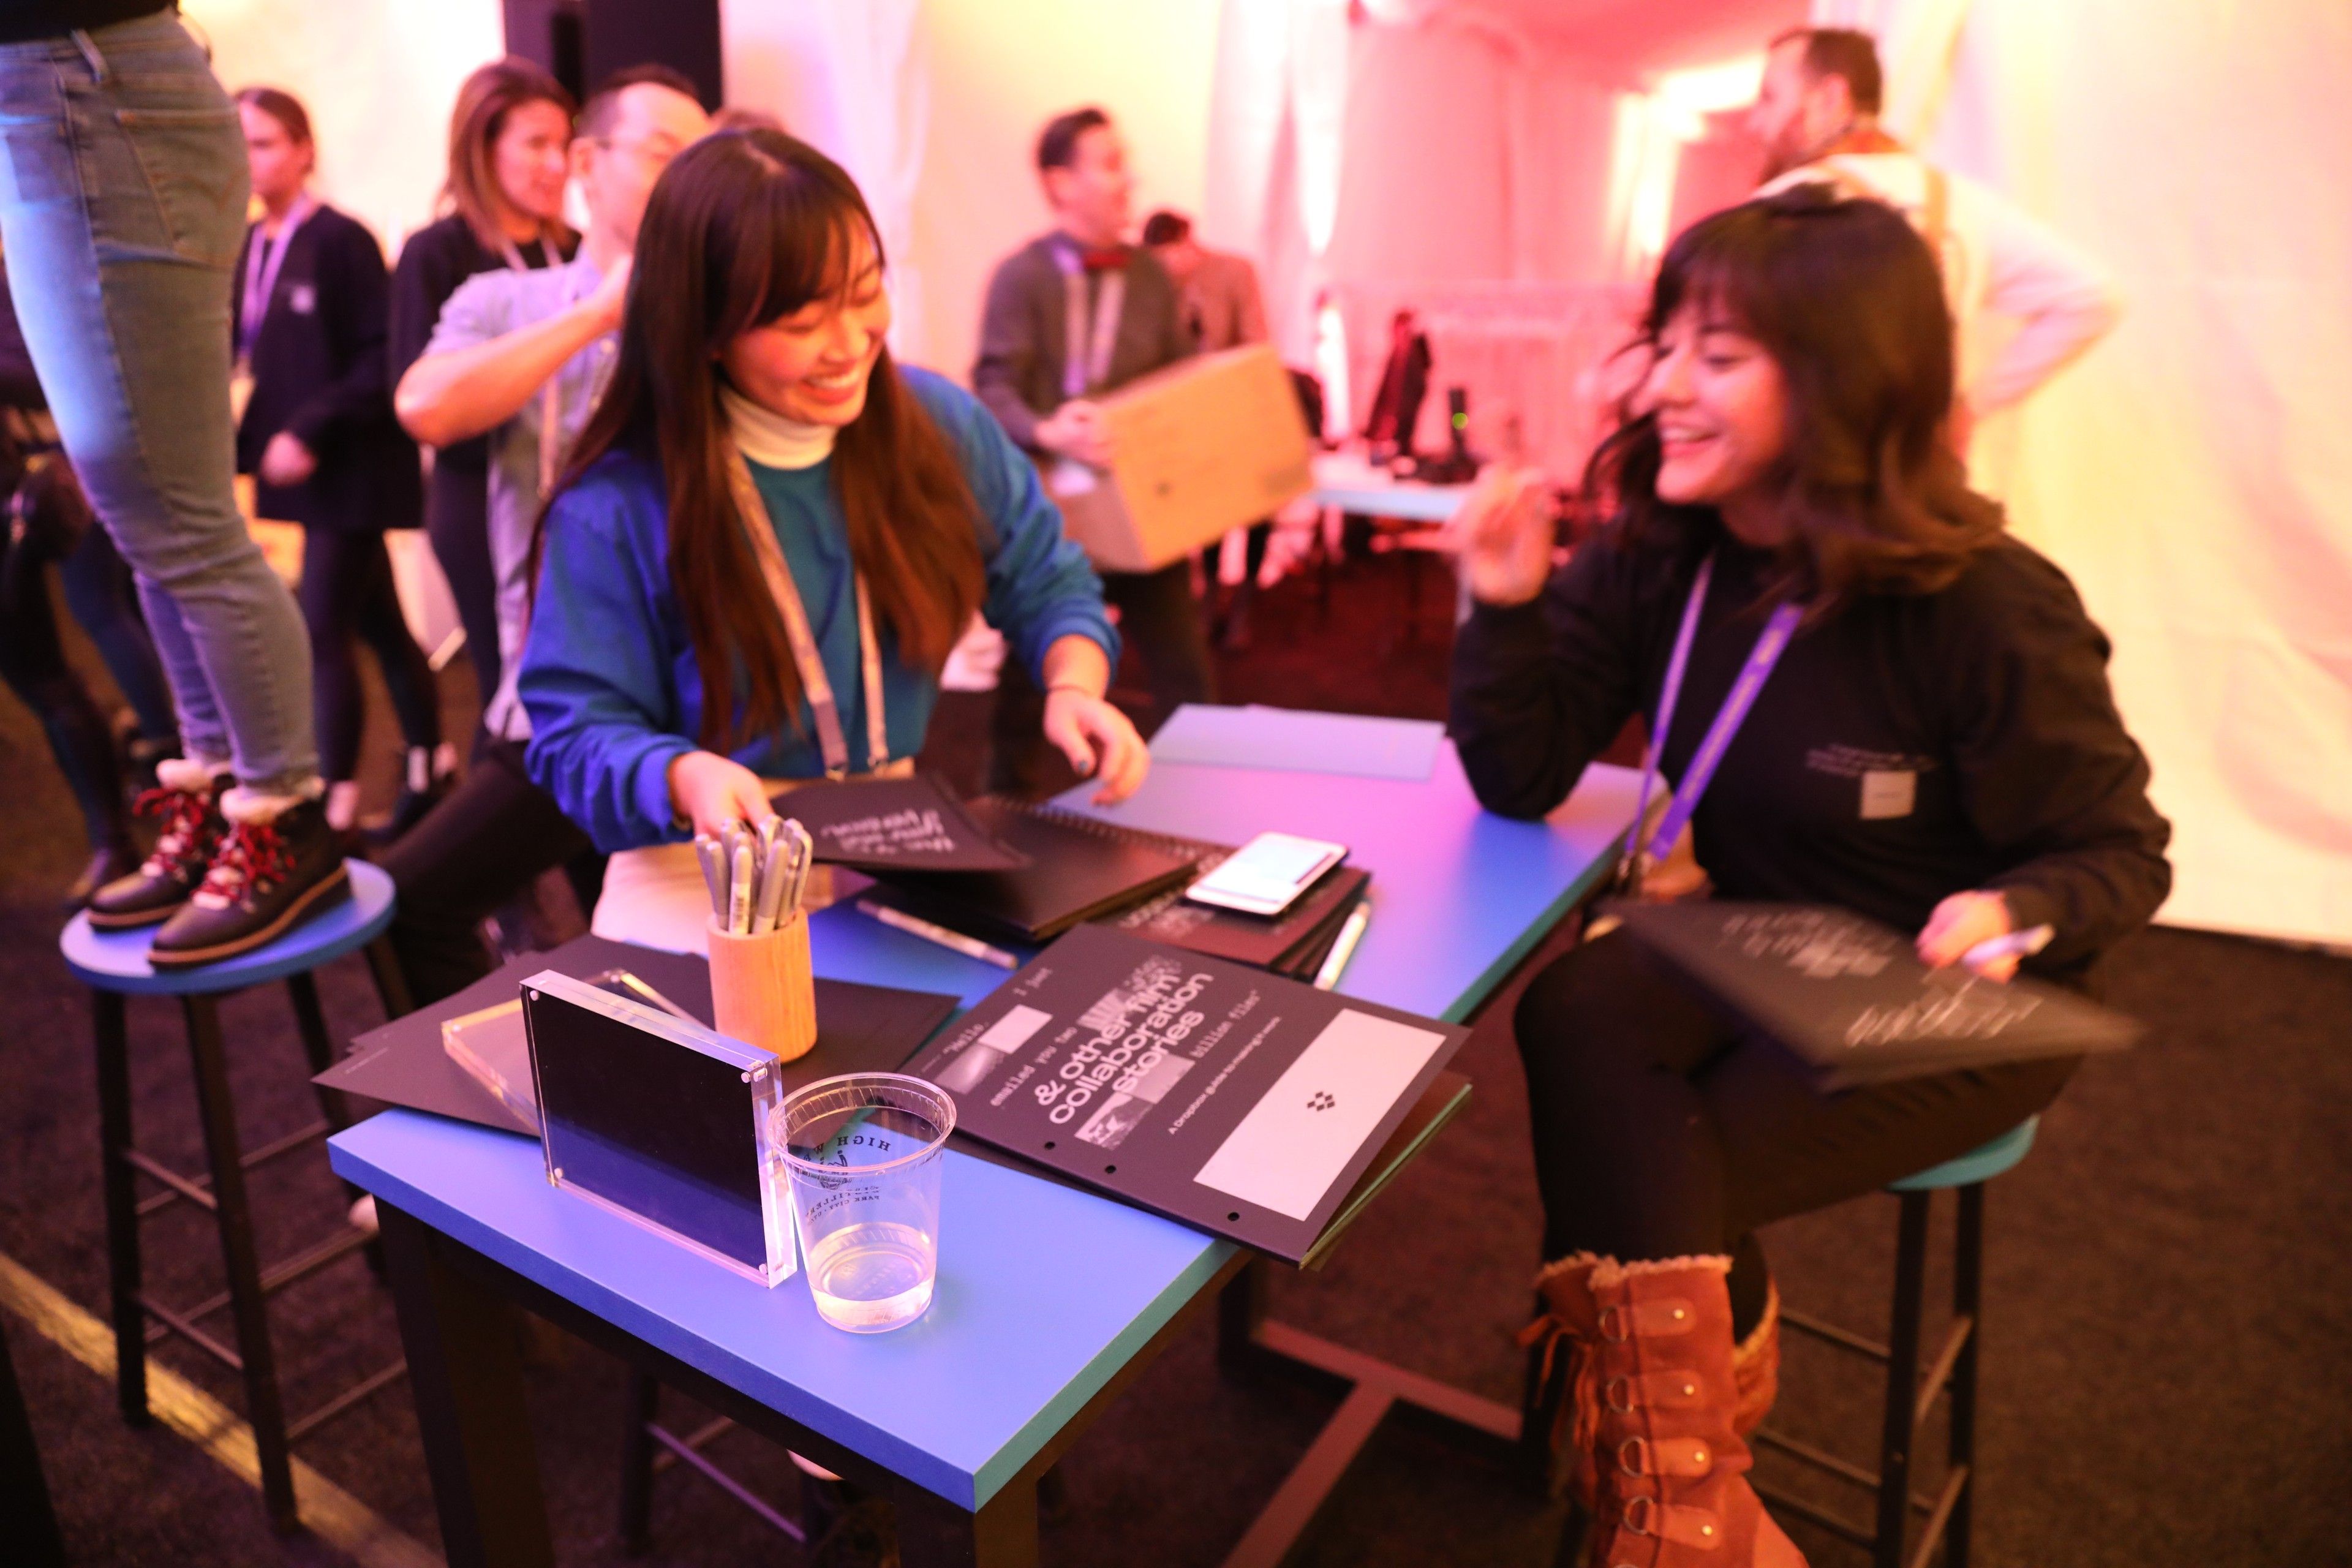 Theresa and Kelly from the Dropbox Brand Studio ready to distribute books at the Sundance Film Festival.